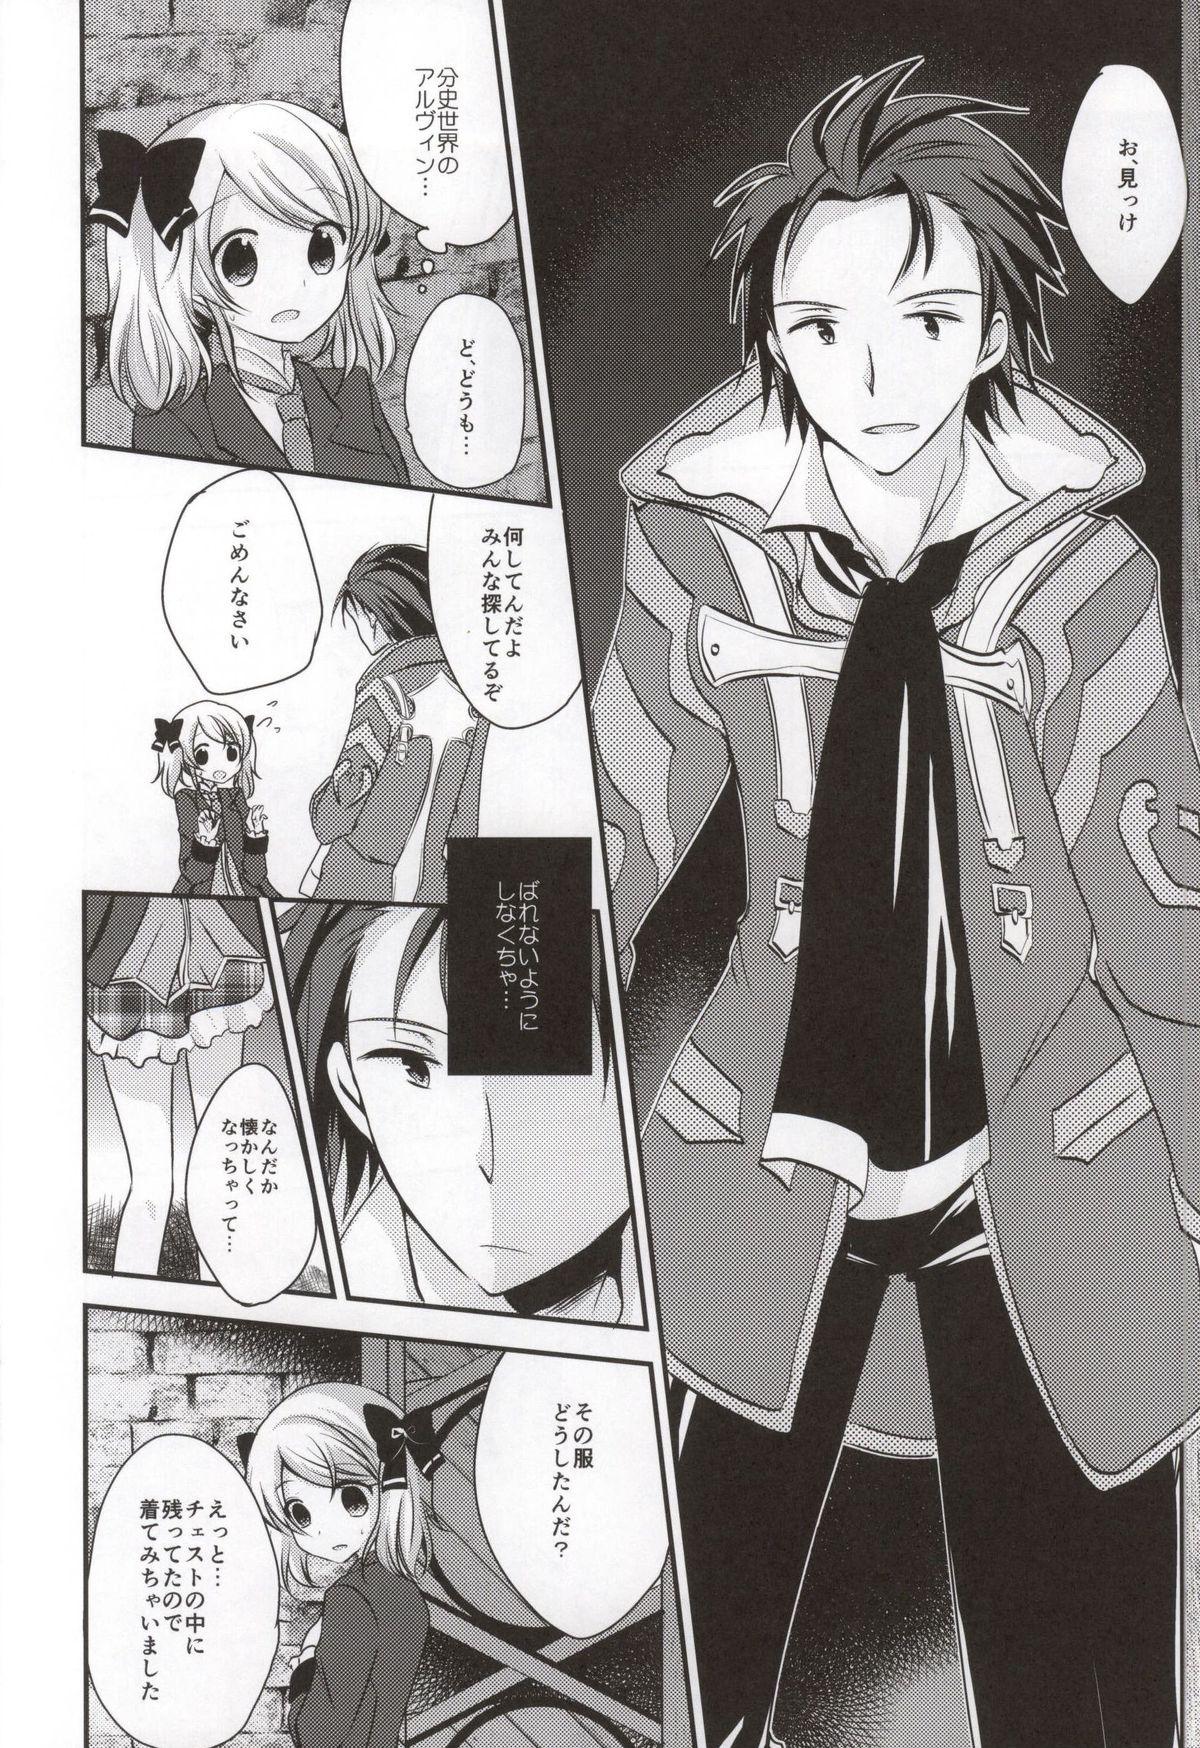 Horny Sluts Gekijou Another - Tales of xillia Straight - Page 6